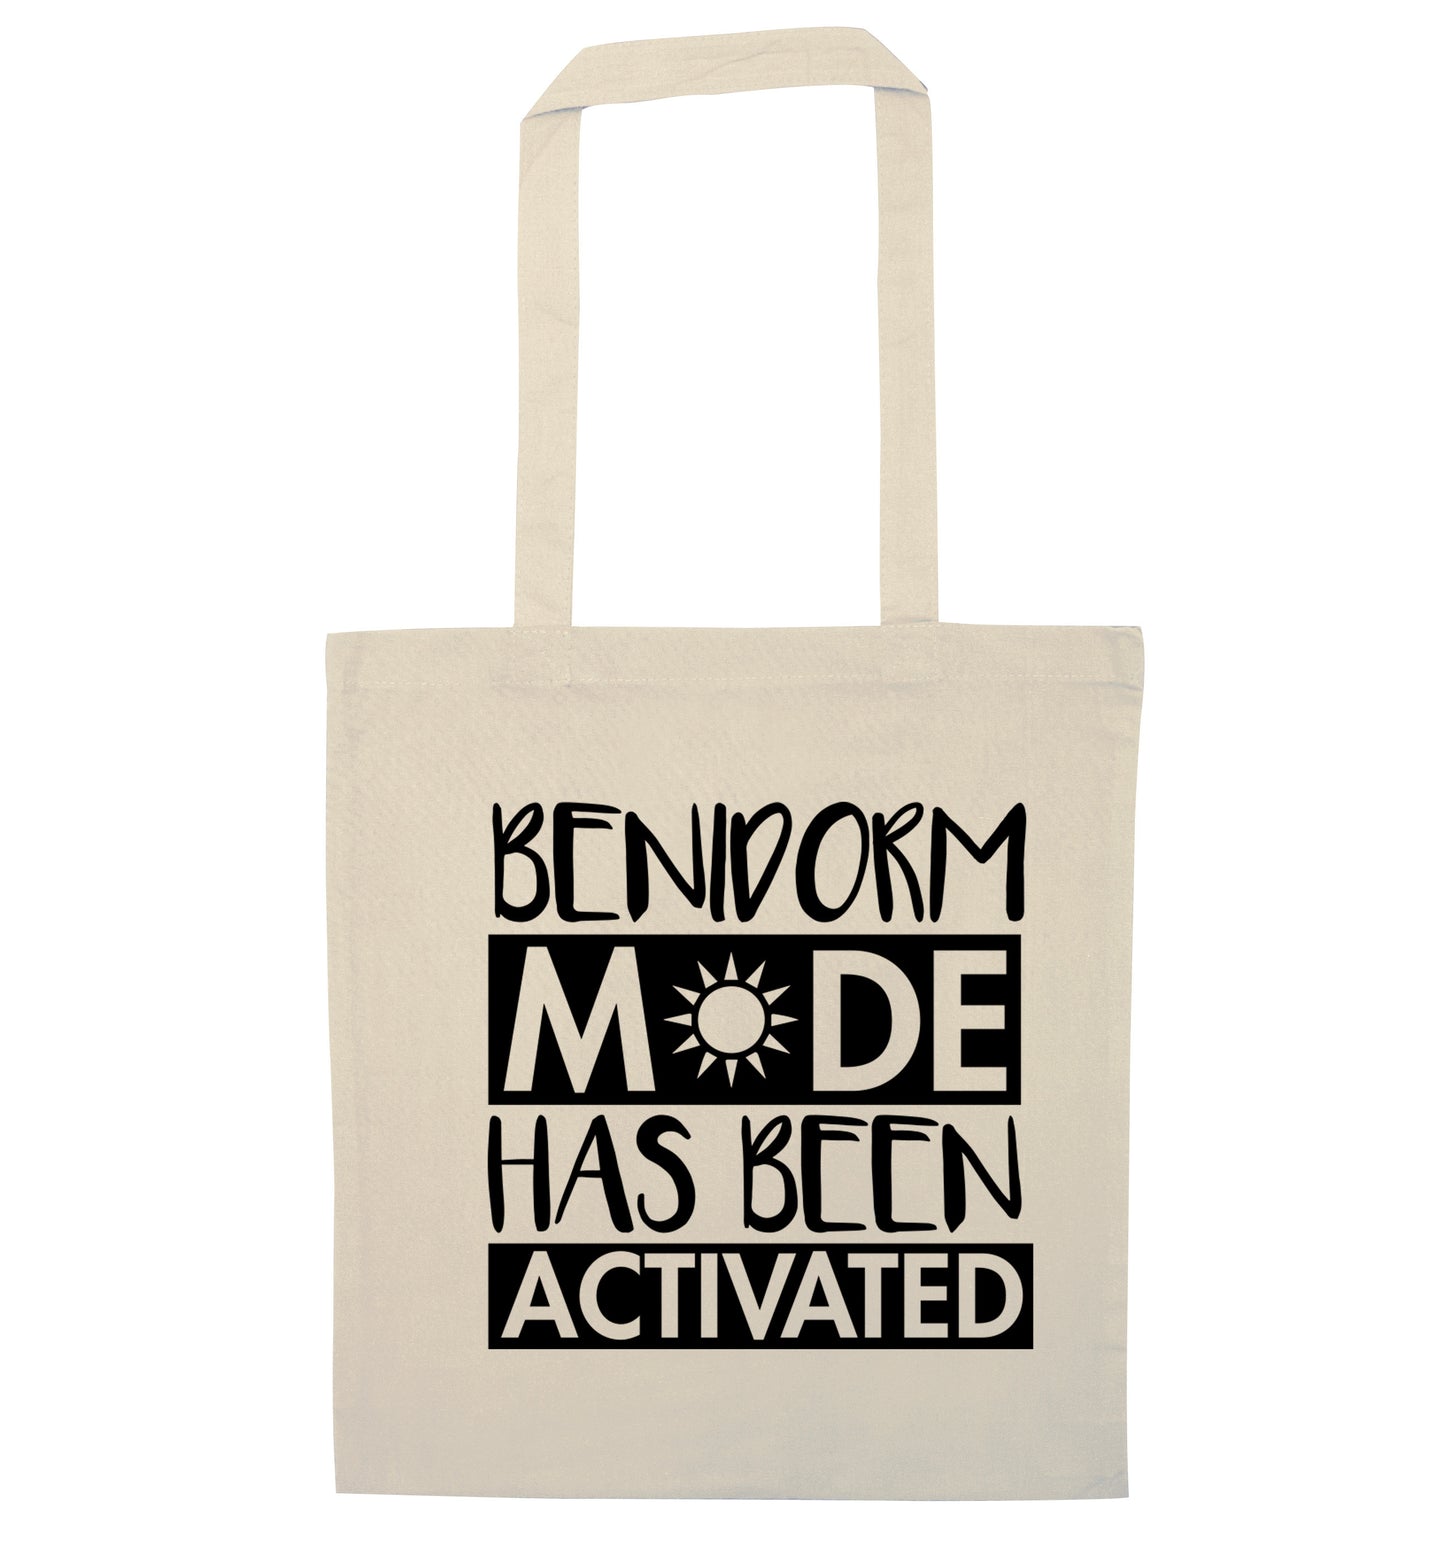 Benidorm mode has been activated natural tote bag